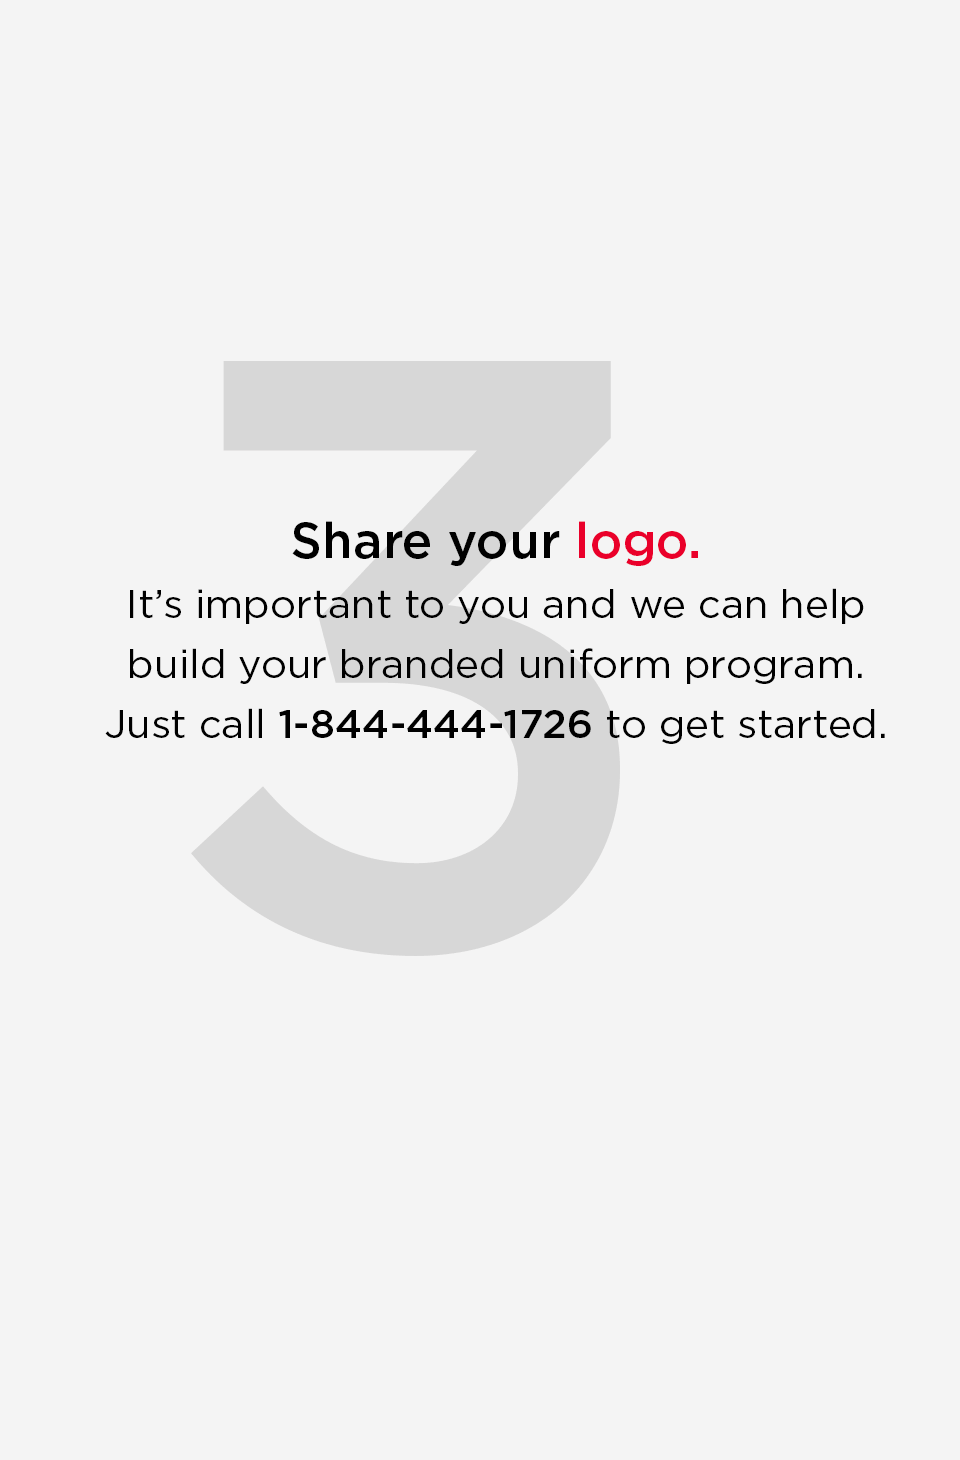 Share your logo. 
    It is important to you and we can help build your branded uniform program. Just call 1 844 444 1726 to get started.